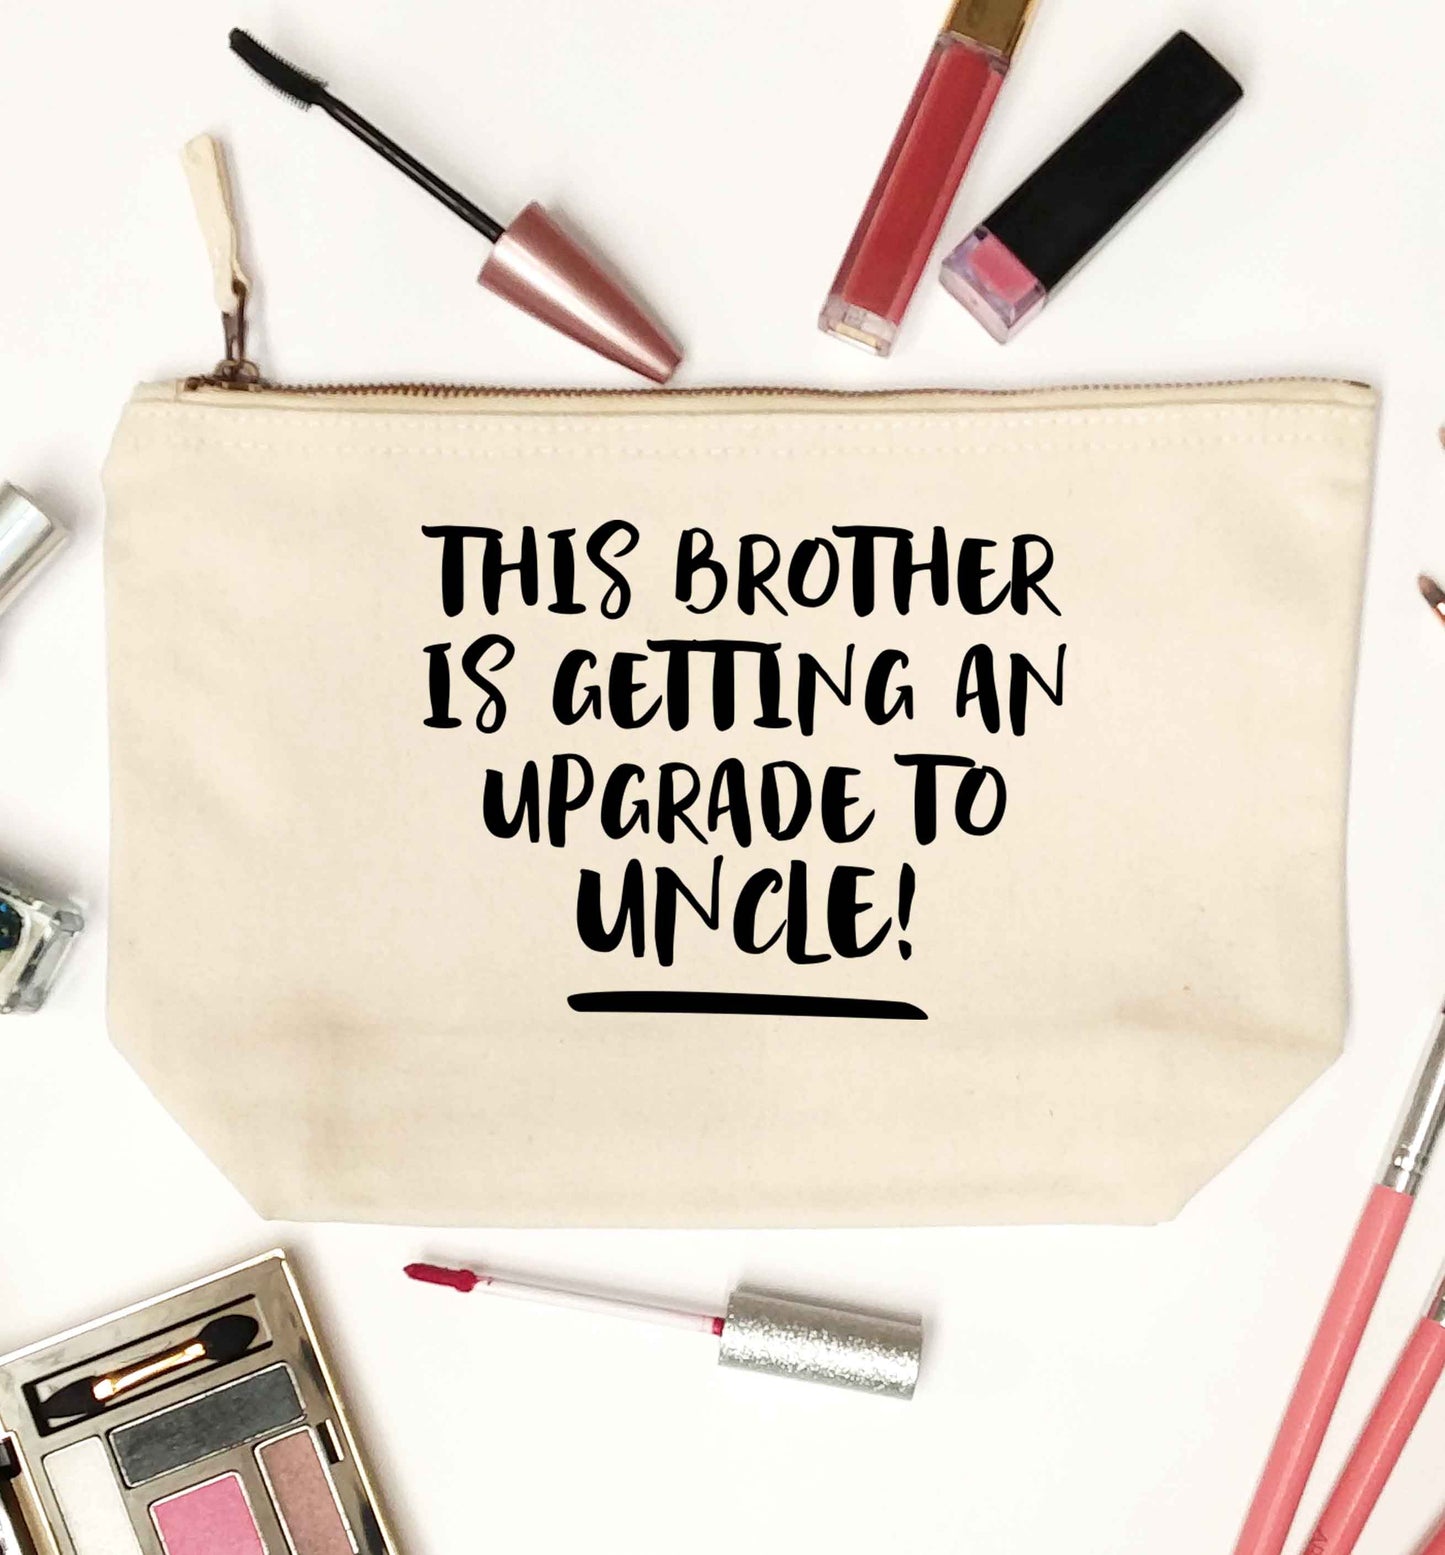 This brother is getting an upgrade to uncle! natural makeup bag